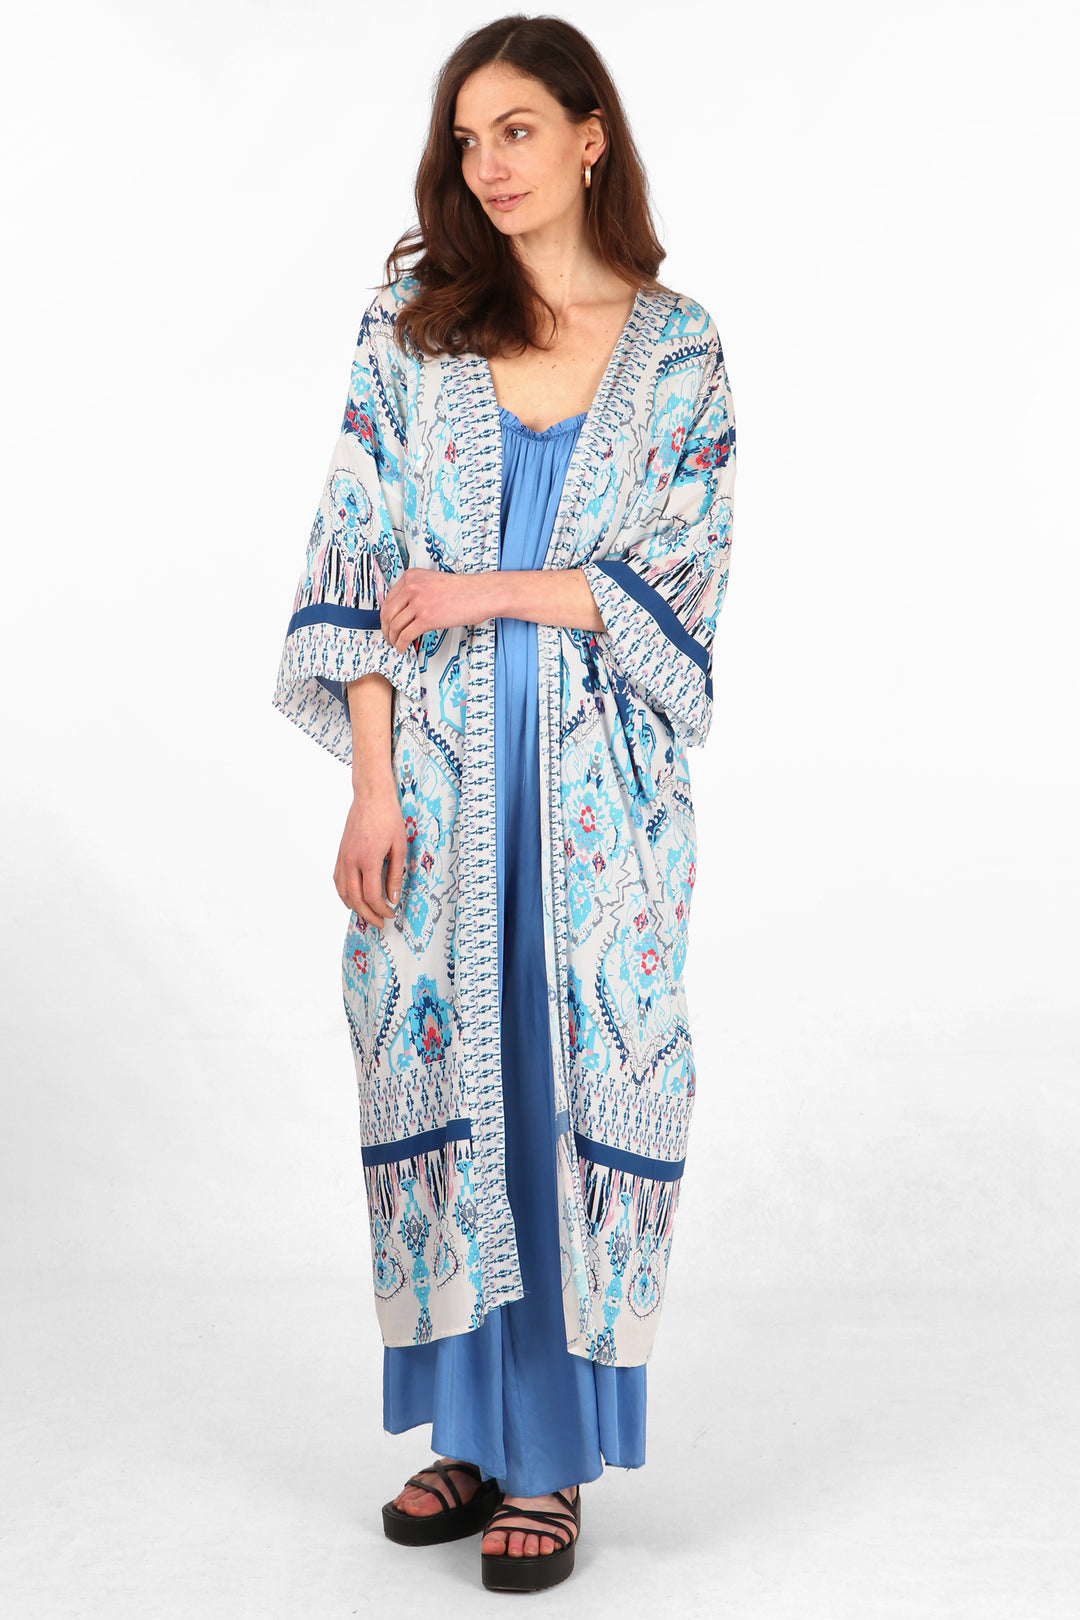 model wearing a midi length open front kimono robe with an ornate blue mandala print pattern and 3/4 sleeves